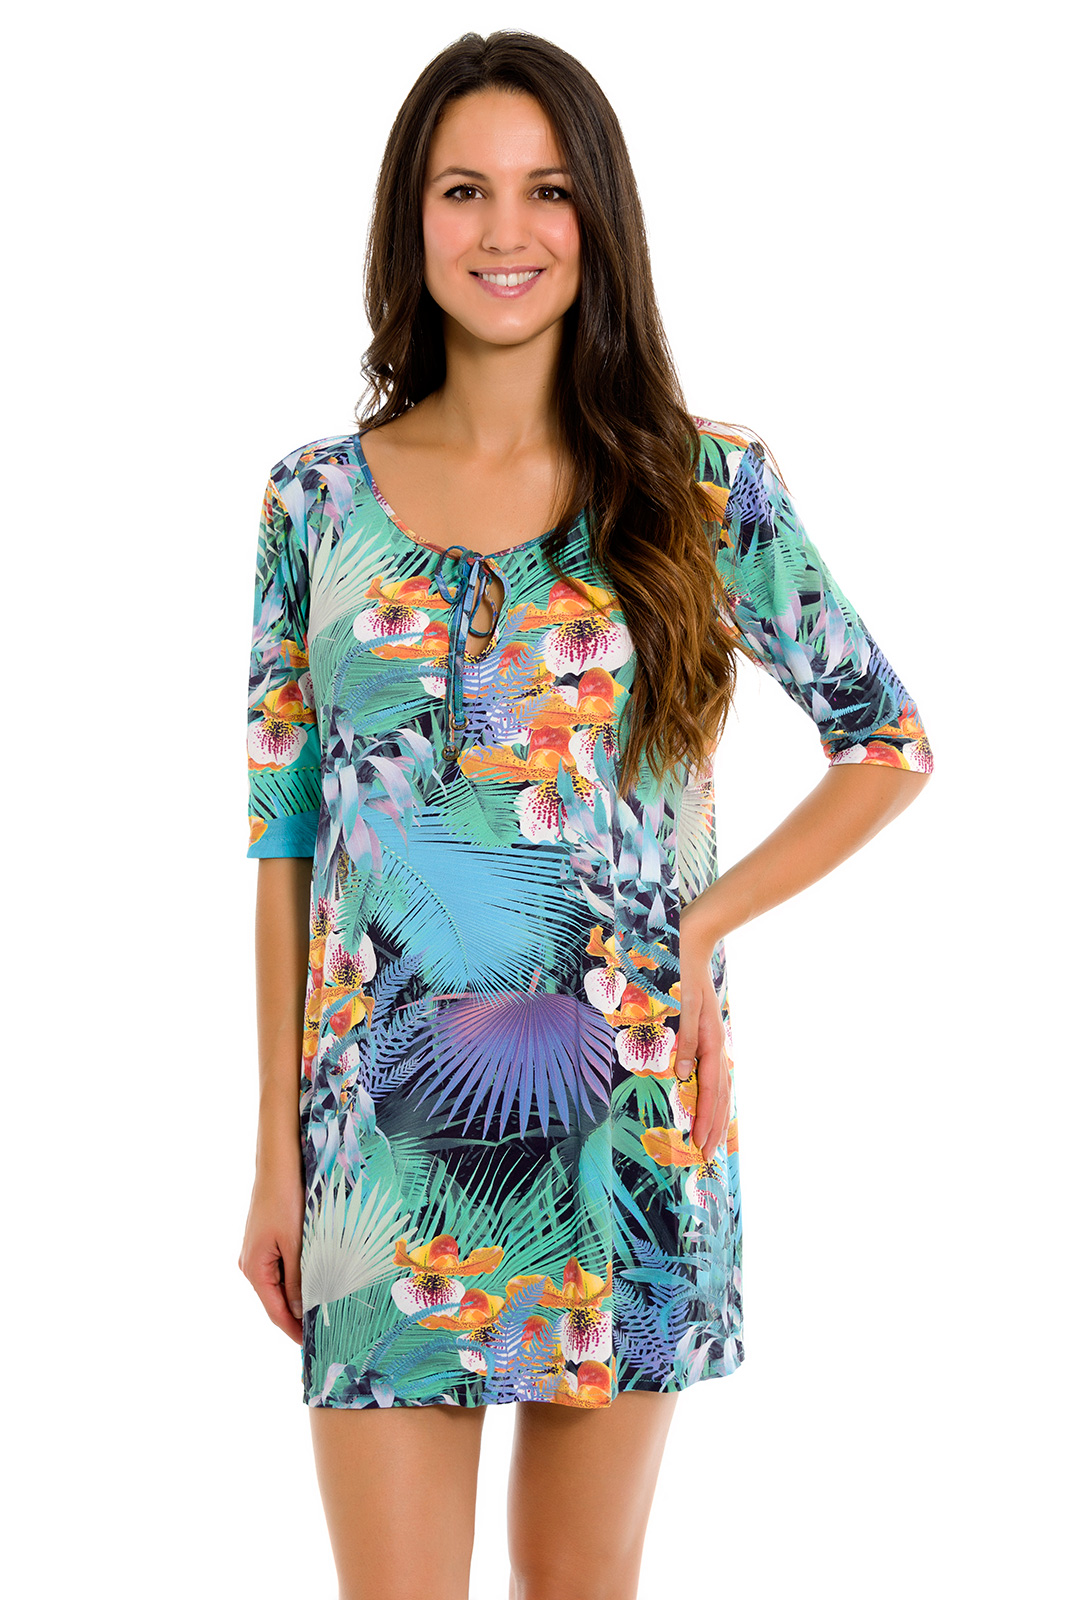 La Playa Blue Beach Cover-up With Tropical Flowers - Tunica Betta